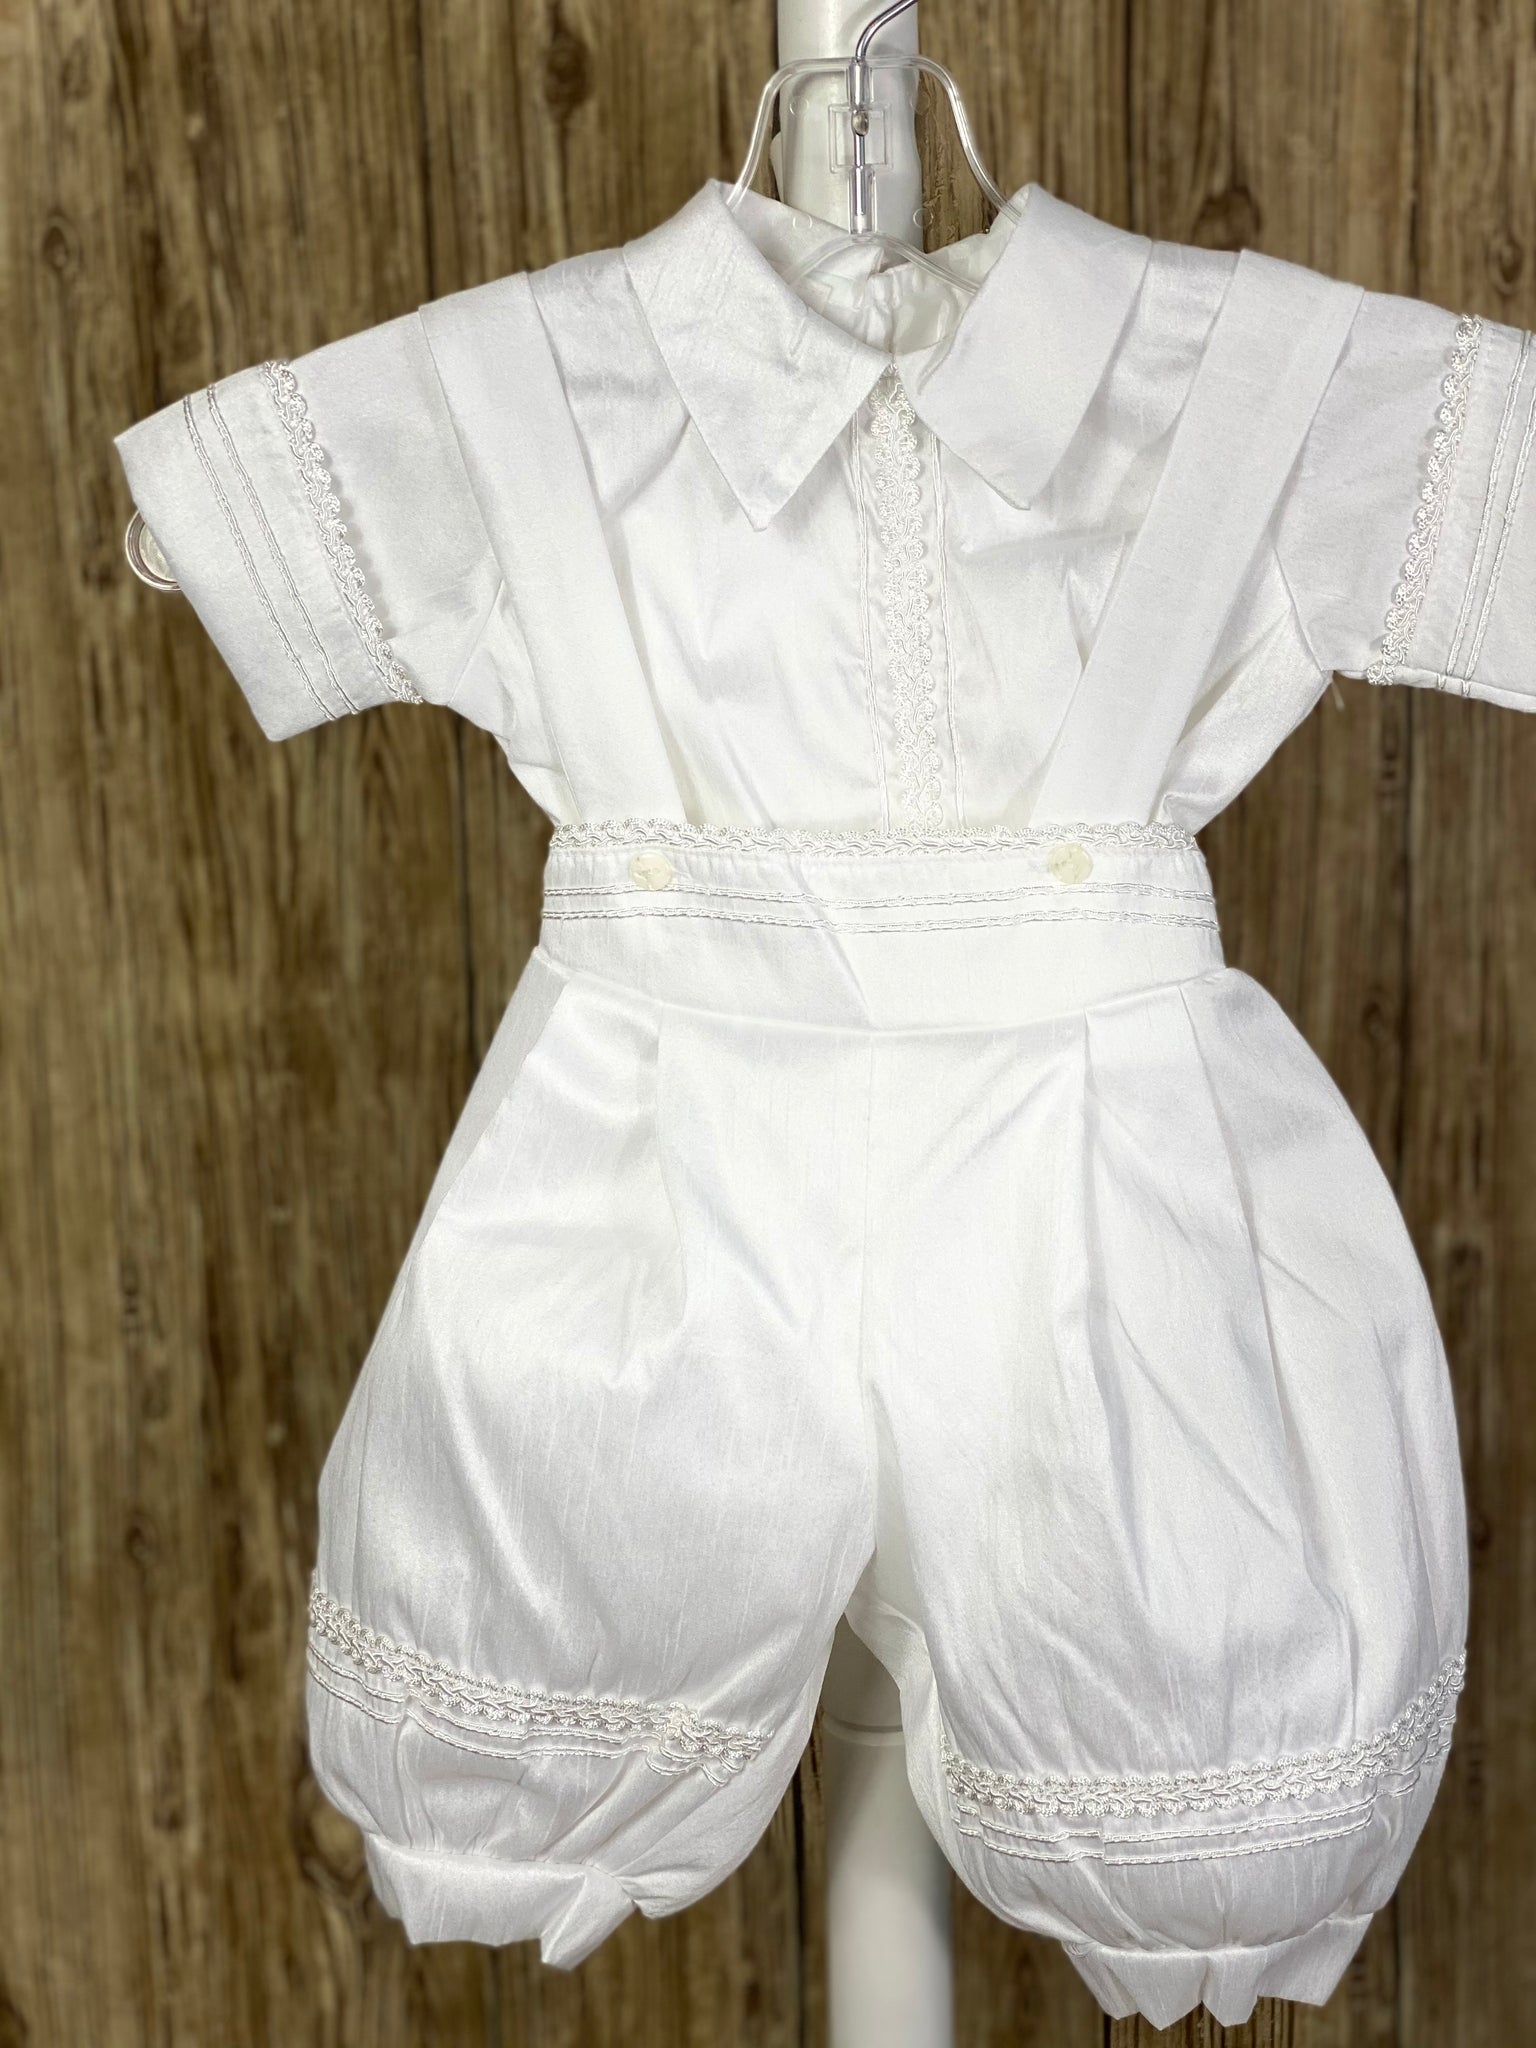 WHITE   4-piece white set including mozzetta, beret, shirt, suspender pants Collared romper with short sleeves Buttoning on pant cuffs Button closure on back of shirt Pin tucks overlapping diagonal with pin wheel detailing inside on mozzetta Wide embroidered lace trim around mozzetta Pearl and white jeweled crosses on mozzetta Rope closure on mozzetta Braided embroidered line detailing on pant, cummerbund, sleeves, beret, and down shirt center